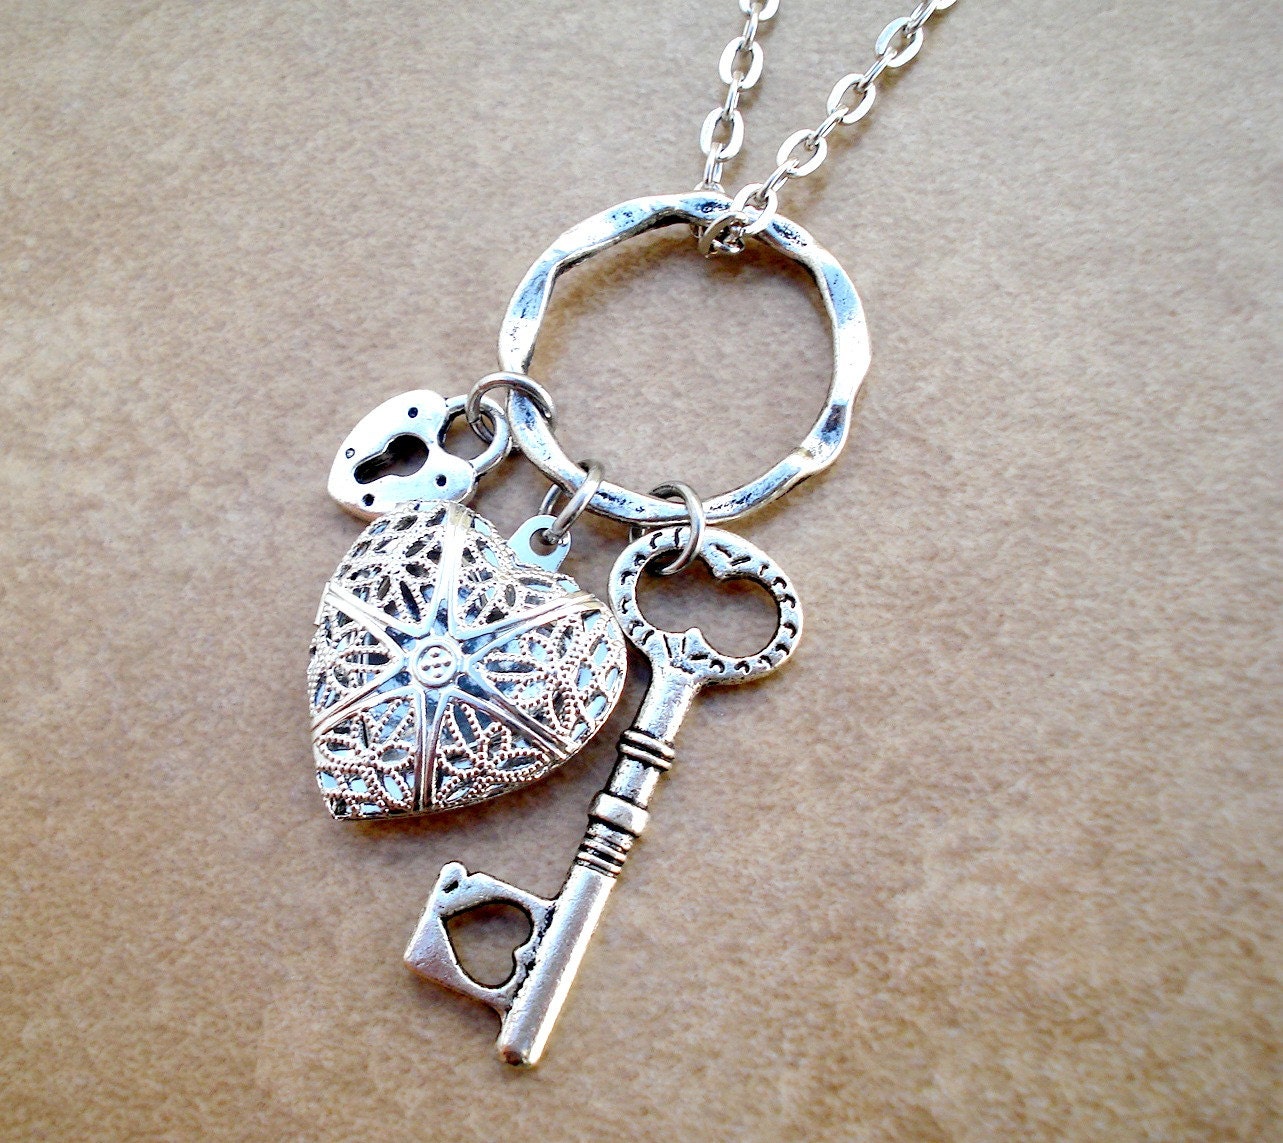 Aromatherapy Heart Shaped Locket with Skeleton Key and Heart